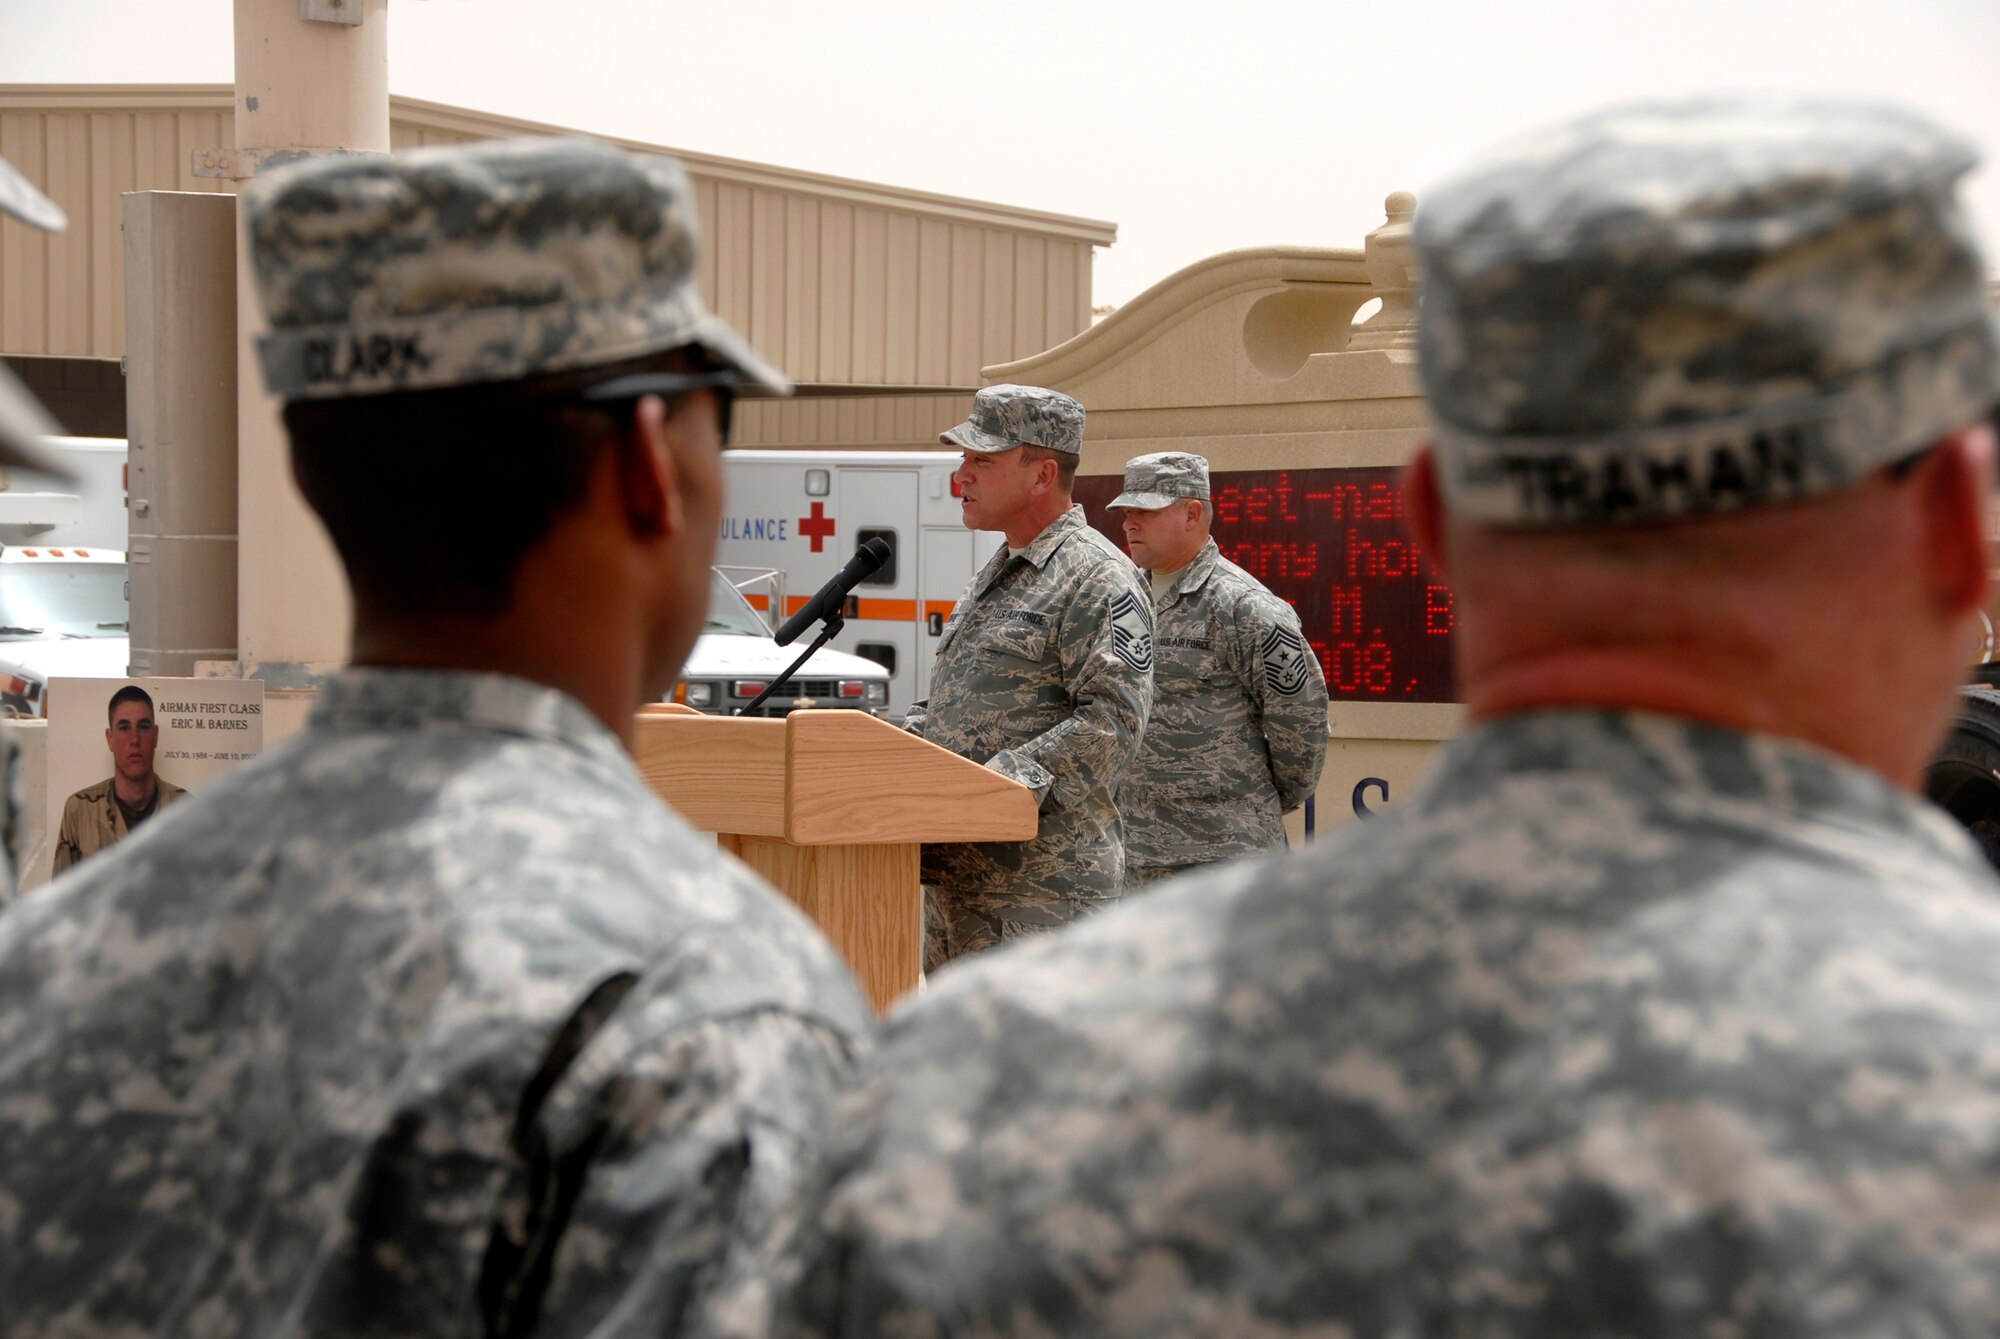 SOUTHWEST ASIA -- Chief Master Sgt. Richard Bunce, 100th Logistics Readiness Squadron chief enlisted manager, speaks during a street dedication ceremony June 10, 2008 on an air base in the Persian Gulf Region. The ceremony is a tribute to Airman 1st Class Eric Barnes and his family with the naming of Barnes Road. Airman Barnes, 20, of Lorain, Ohio, died June 10, 2007 as a result of an improved explosive device attack on an Air Force convoy about 100 miles south of Baghdad, Iraq. He was deployed from the 90th Logistics Readiness Squadron at F.E. Warren Air Force Base, Wyo.  (U.S. Air Force photo/ Staff Sgt. Patrick Dixon)